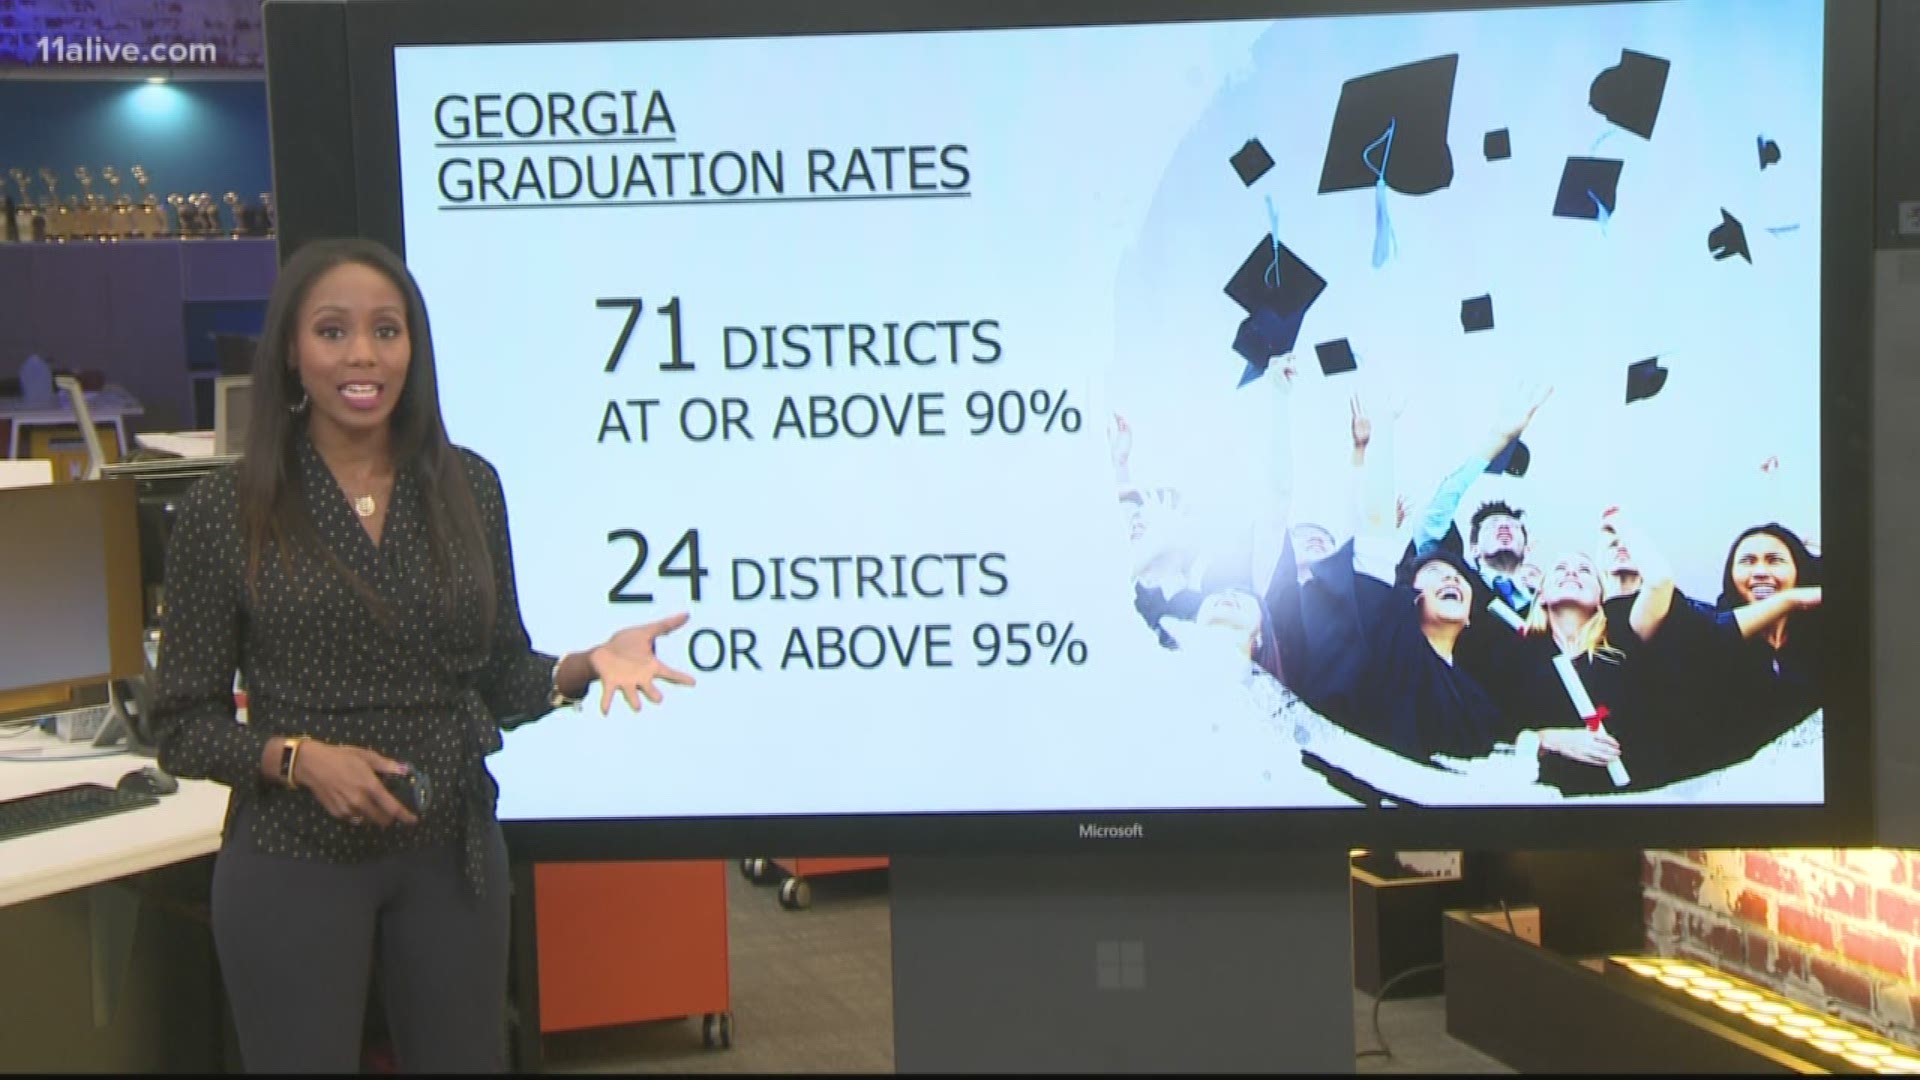 Georgia’s graduation rate has increased by 12 percentage points since 2012